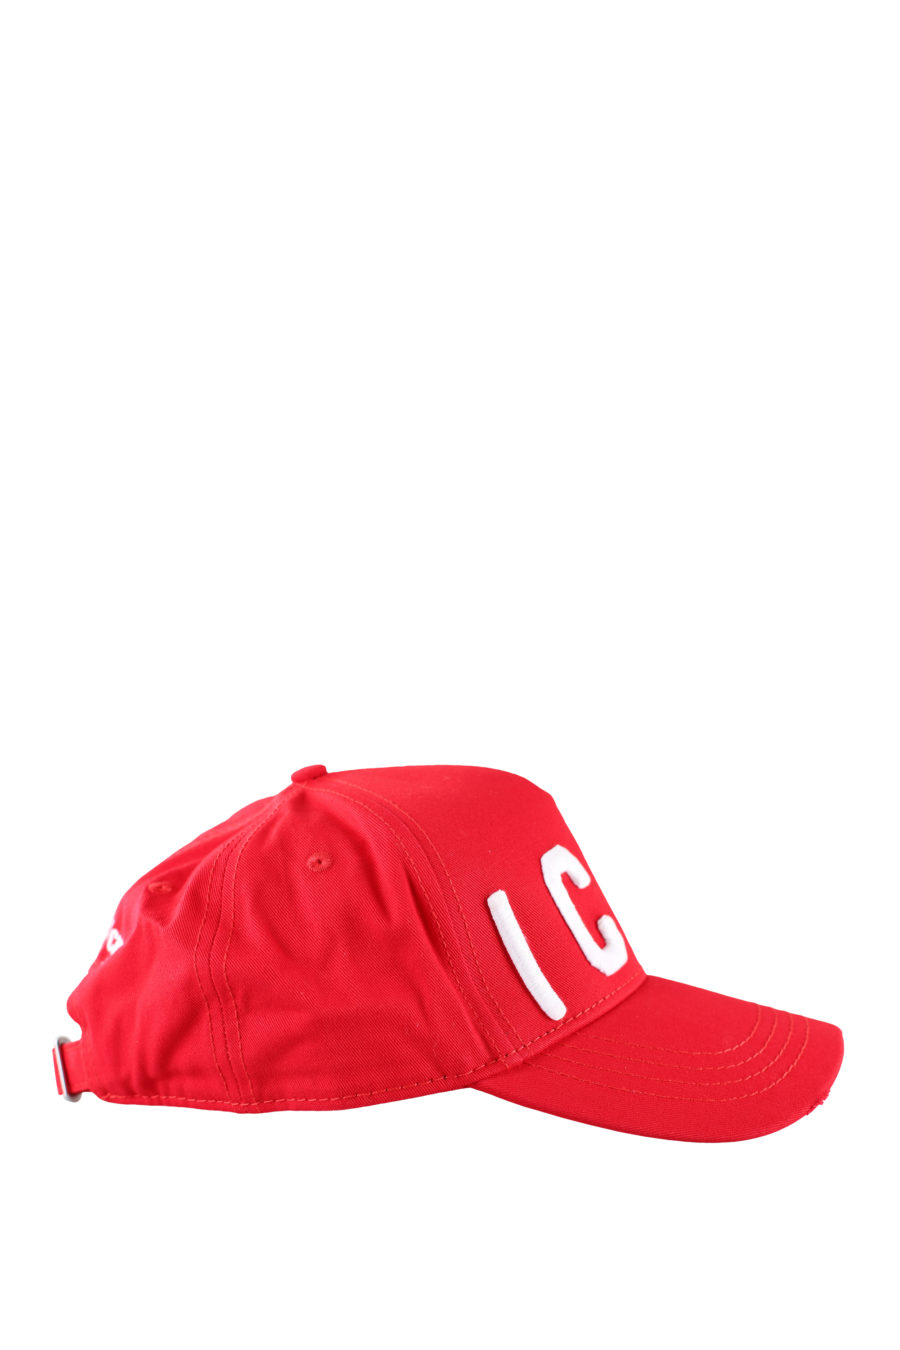 Adjustable red cap with white "icon" logo - IMG 0060